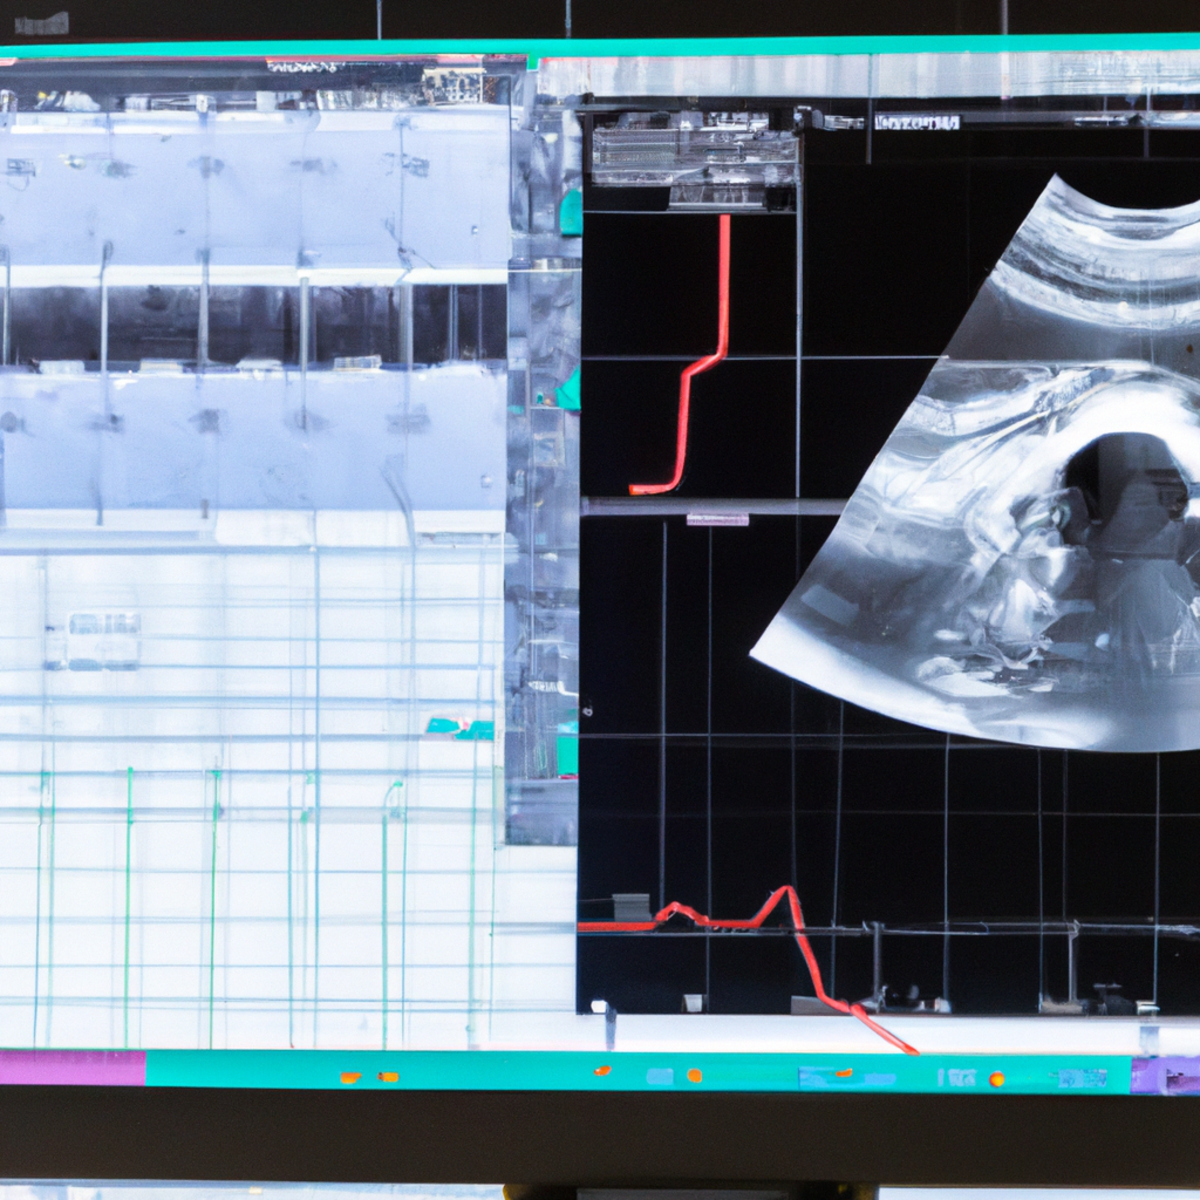 Sophisticated echocardiography machine displays detailed ultrasound image of Left Ventricular Noncompaction (LVNC)